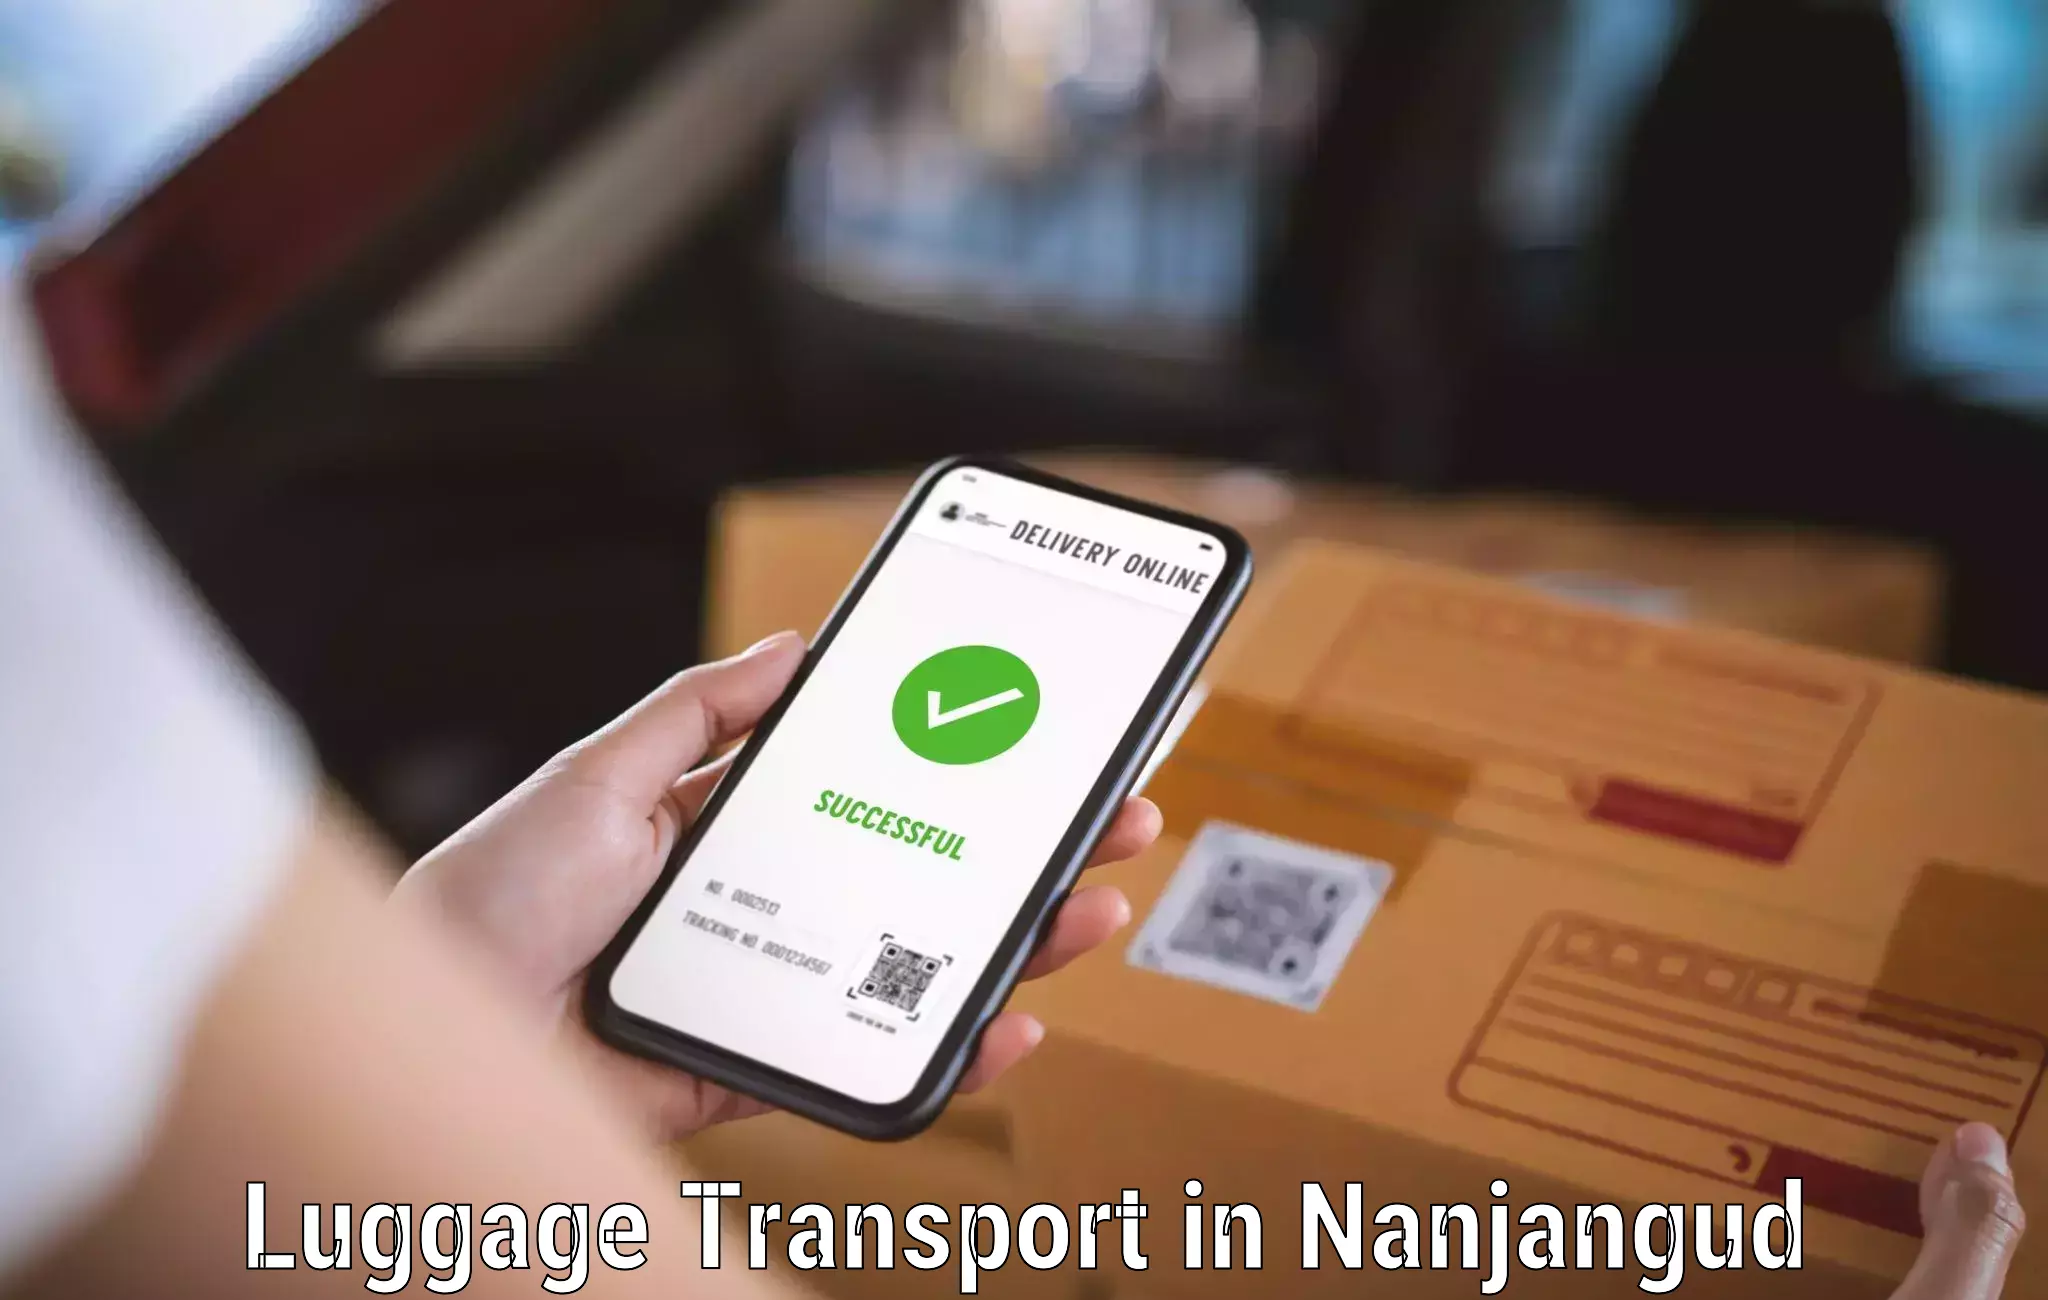 Luggage transport consulting in Nanjangud